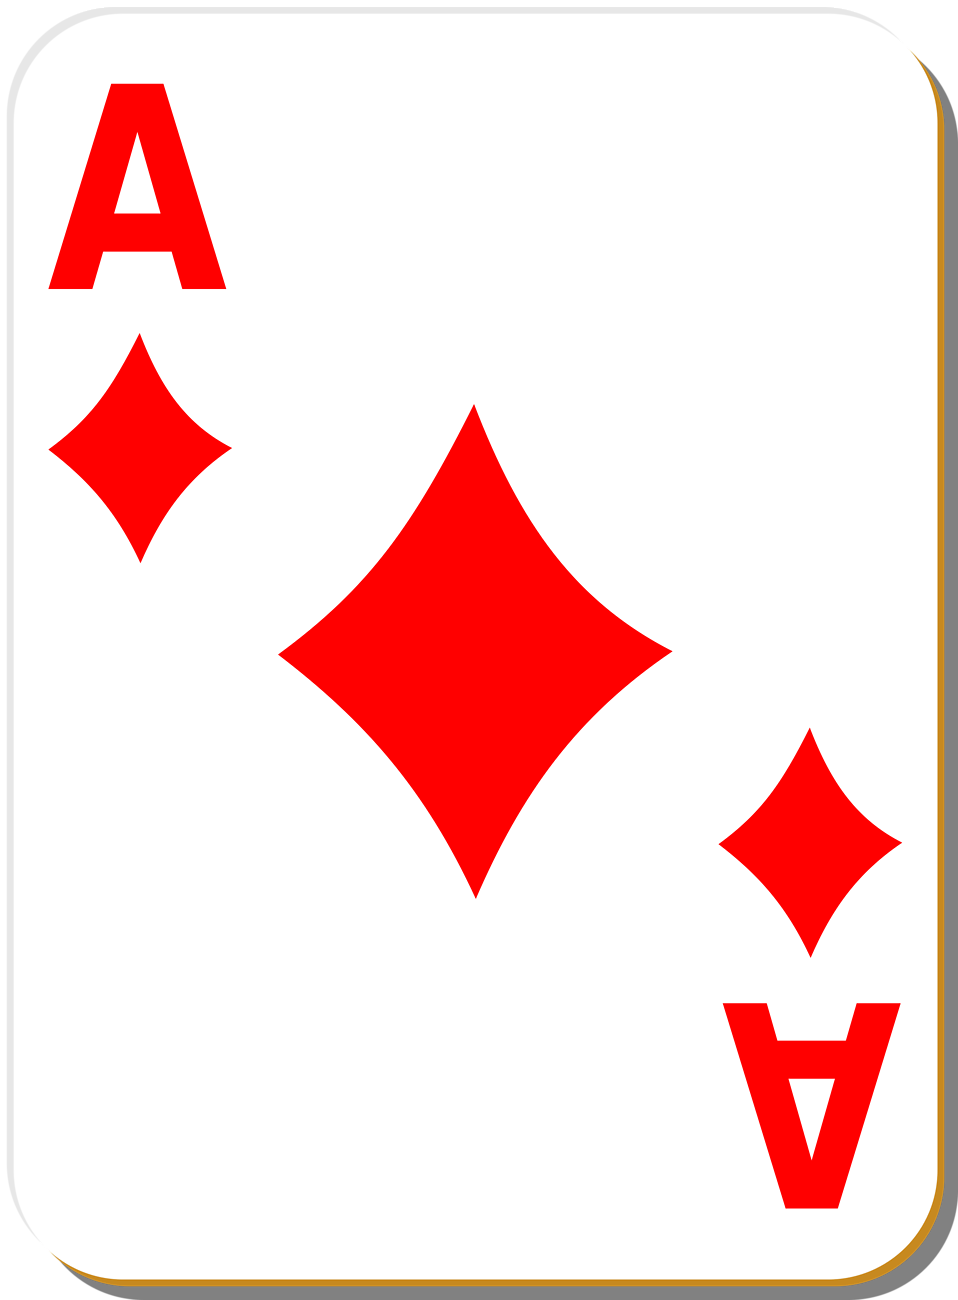 Playing Card   Free Stock Photo   Illustration Of An Ace Of Diamonds